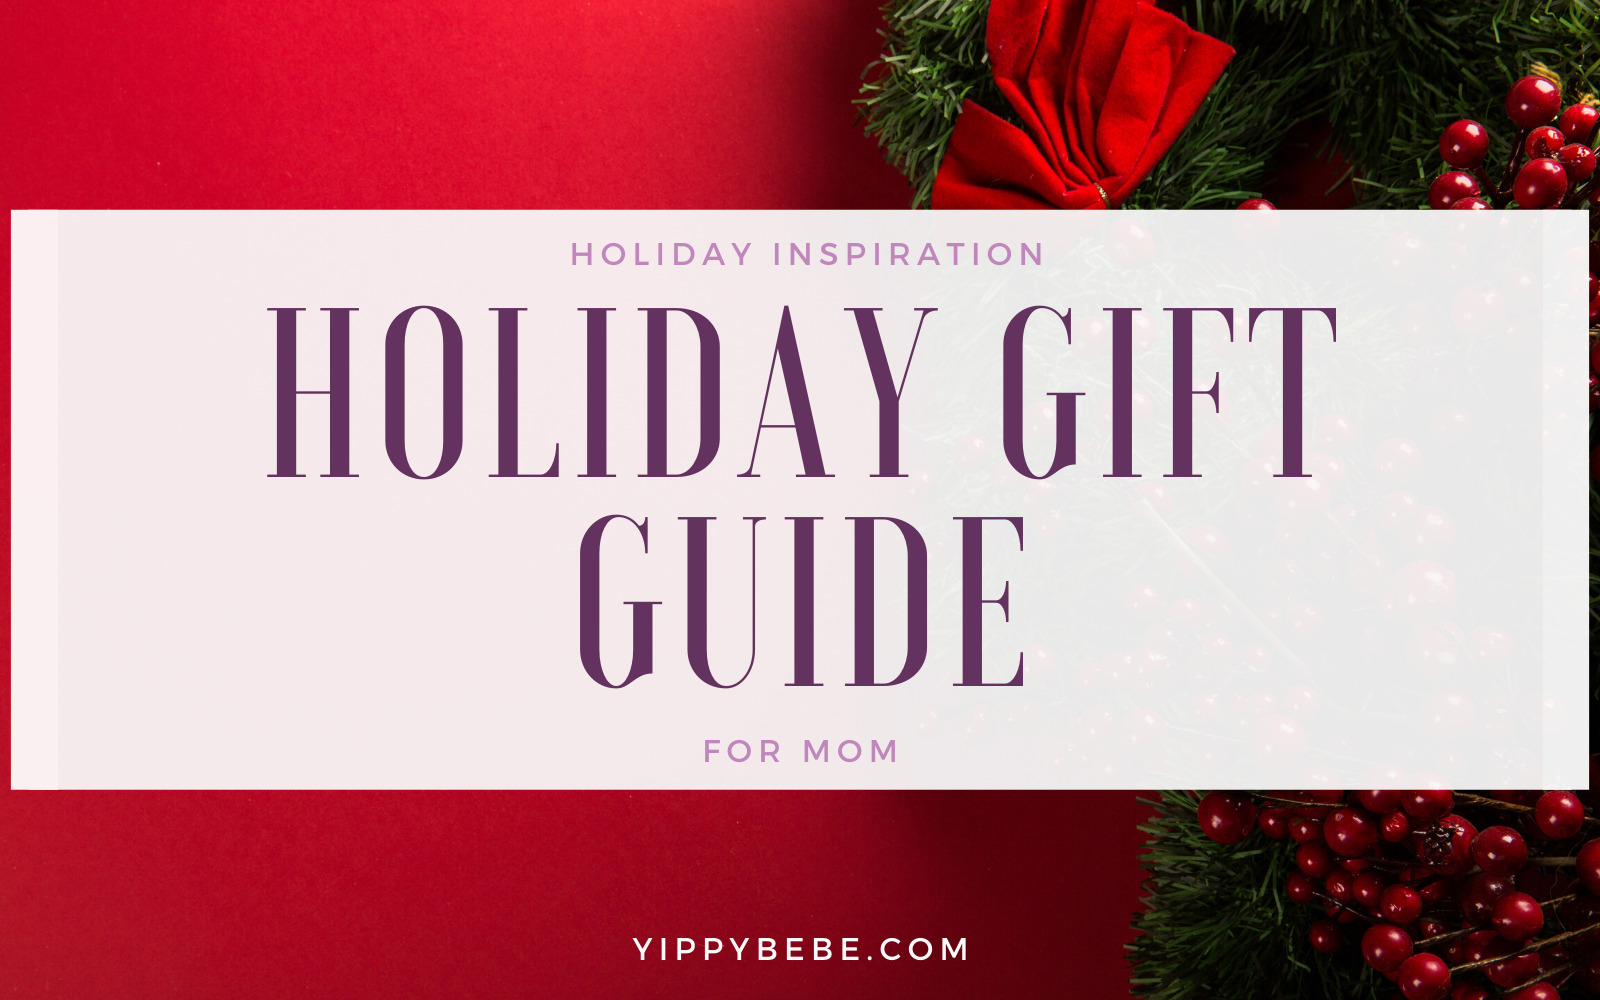 Holiday gift guide for mom